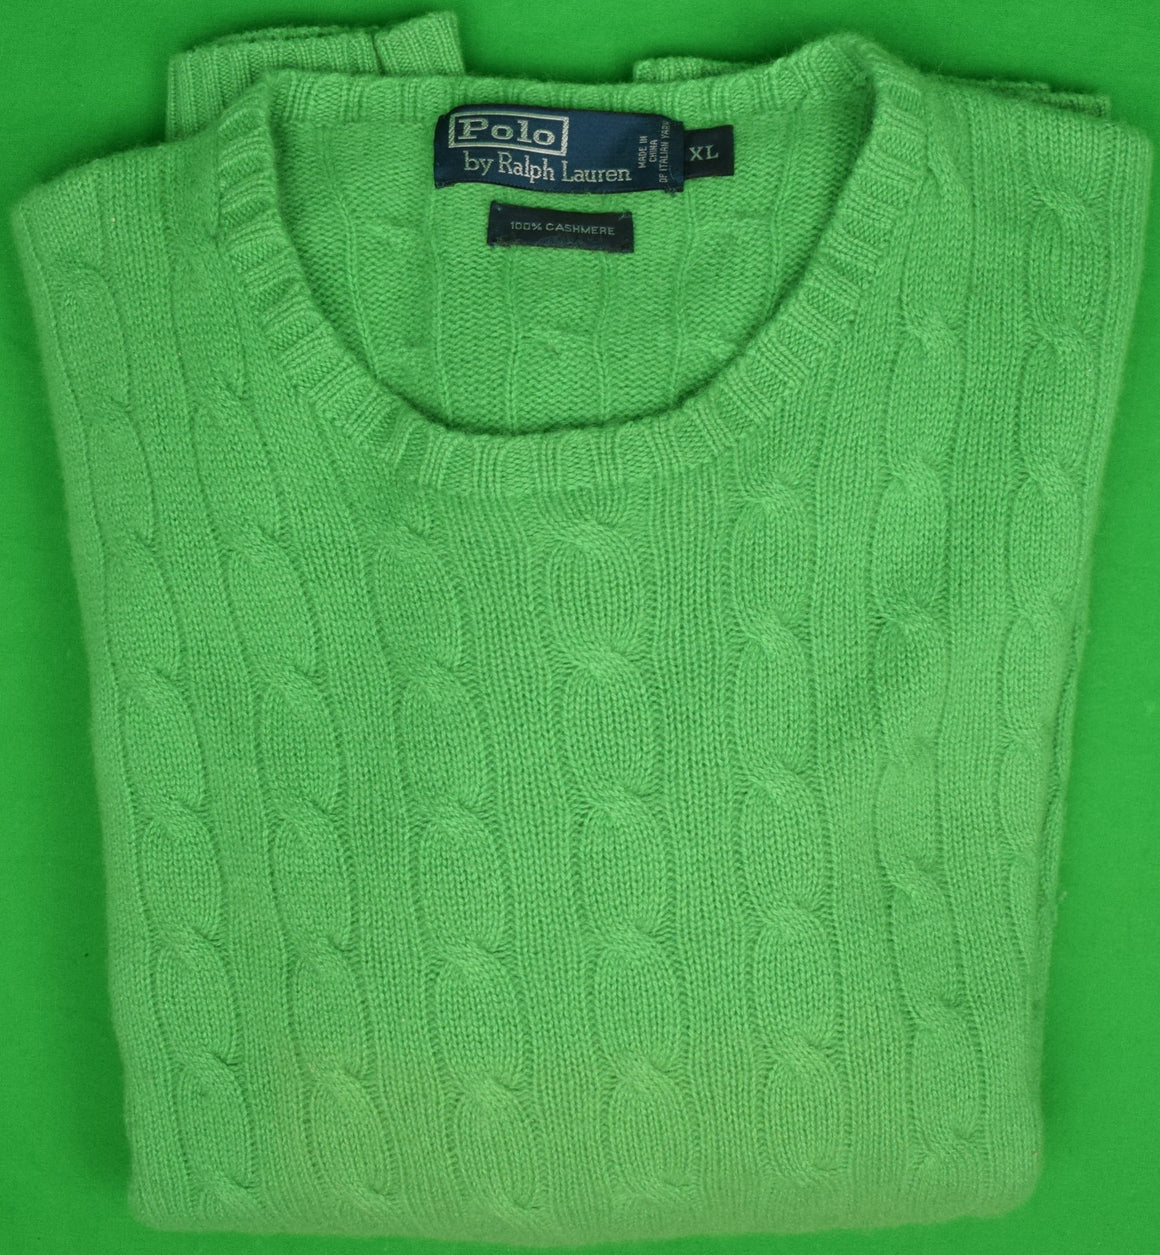 "Polo by Ralph Lauren 100% Cashmere Kelly Green Cable Crewneck Sweater" Sz: XL